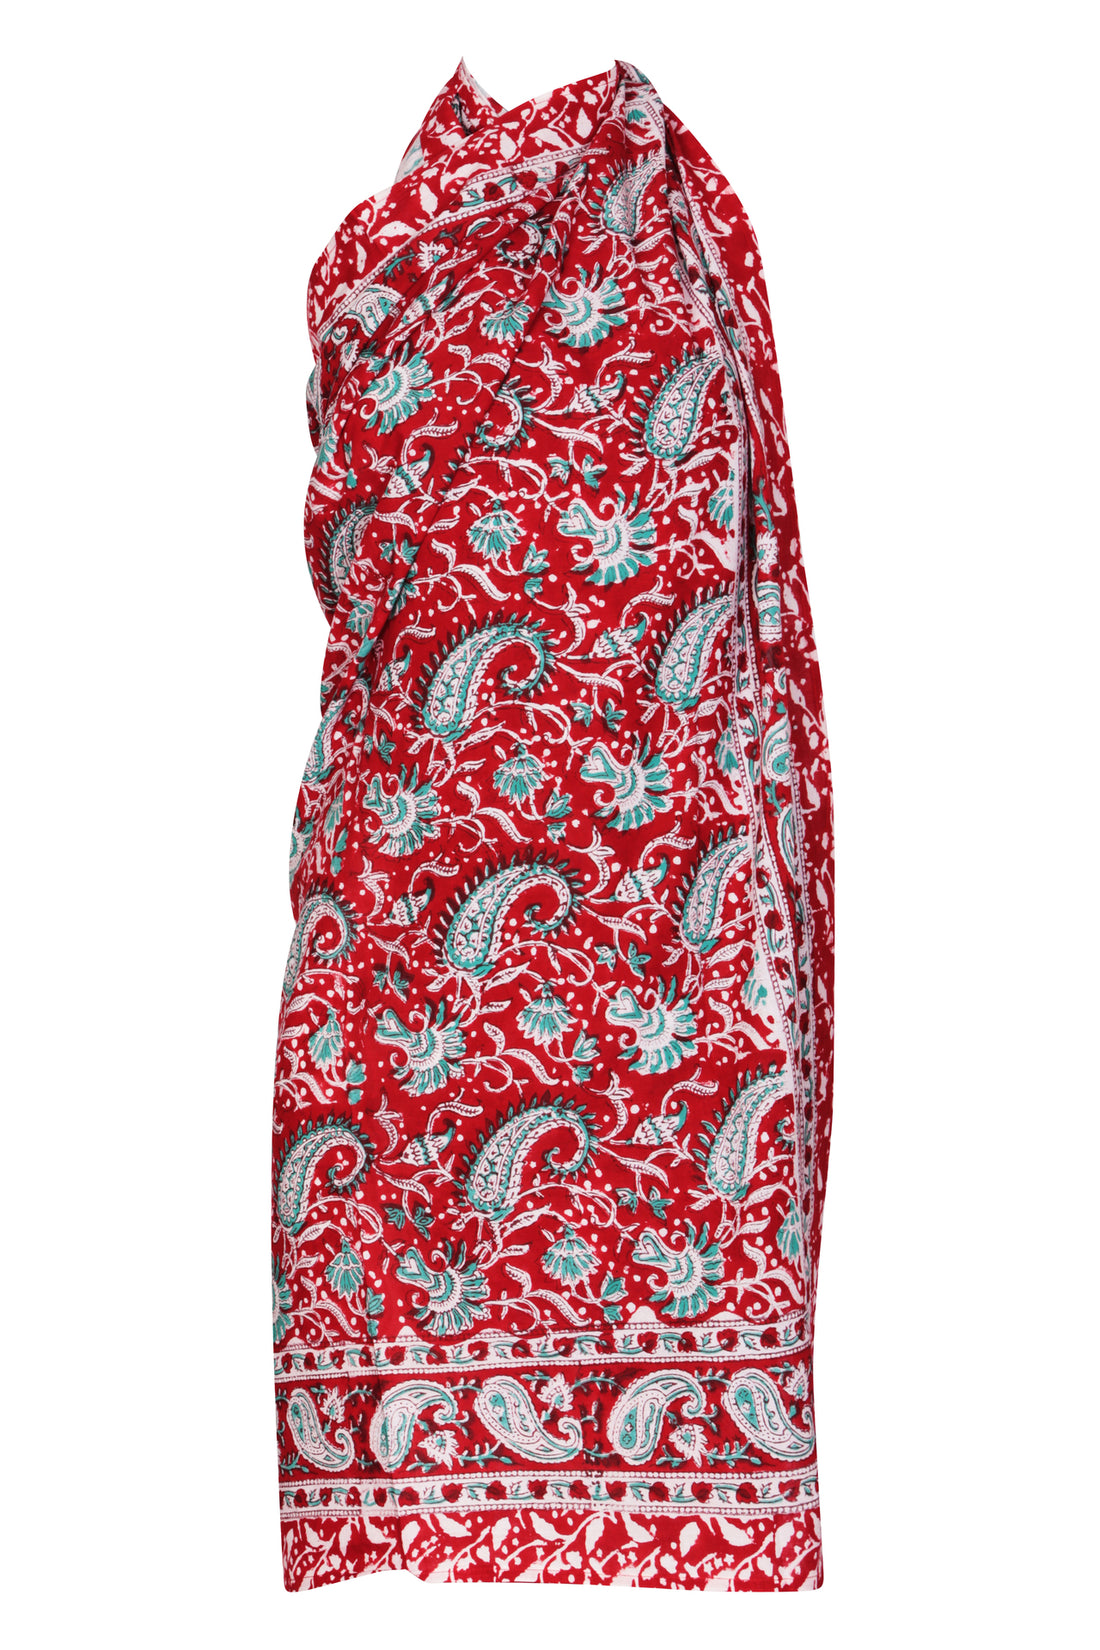 Sarong-One Size - Paisley Red